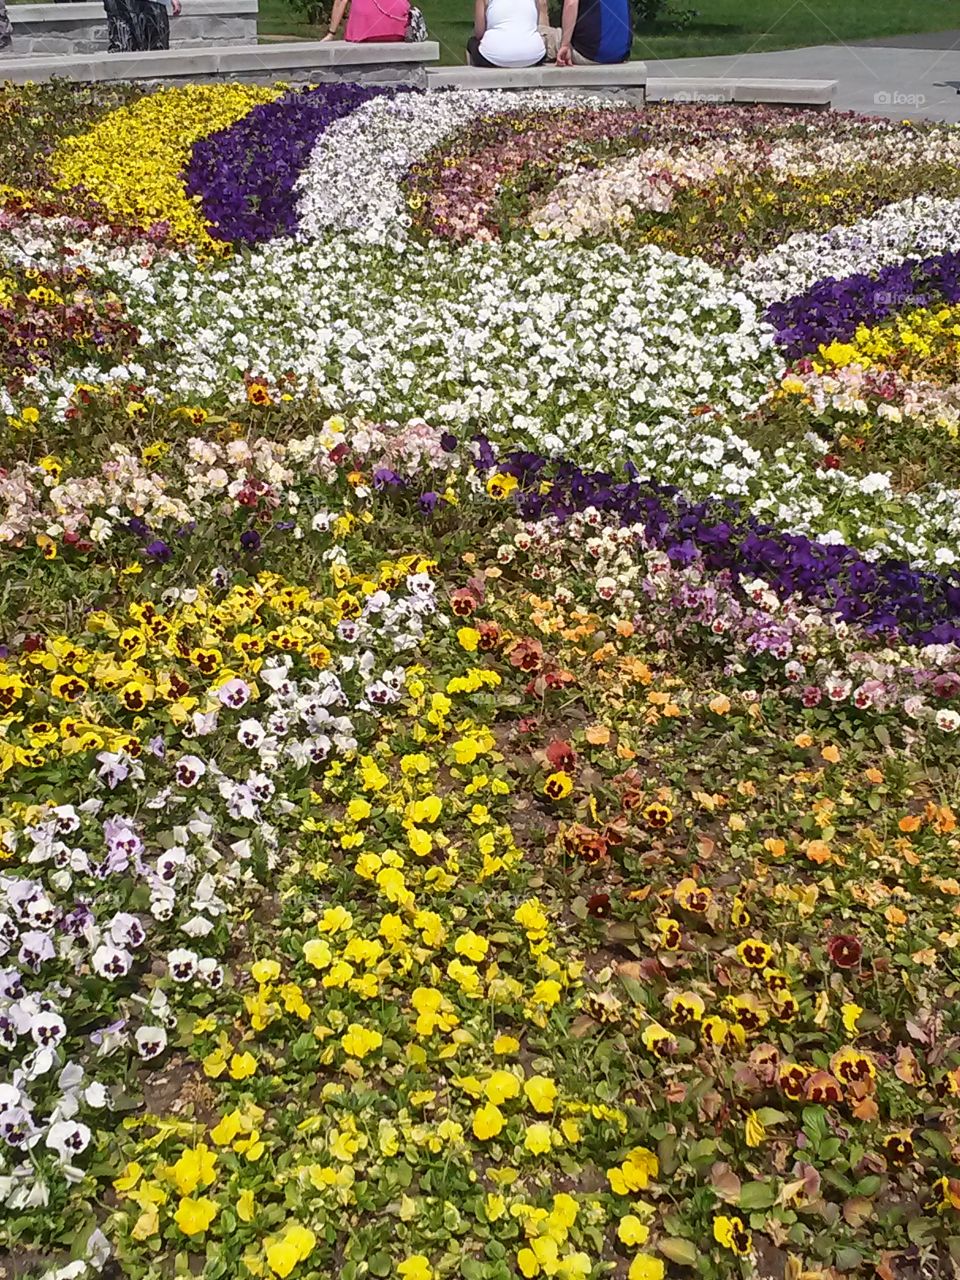 Circle Of Flowers. A circle of flowers on display at Highland Park in Rochester,NY during Mothers'Day weekend 2015 